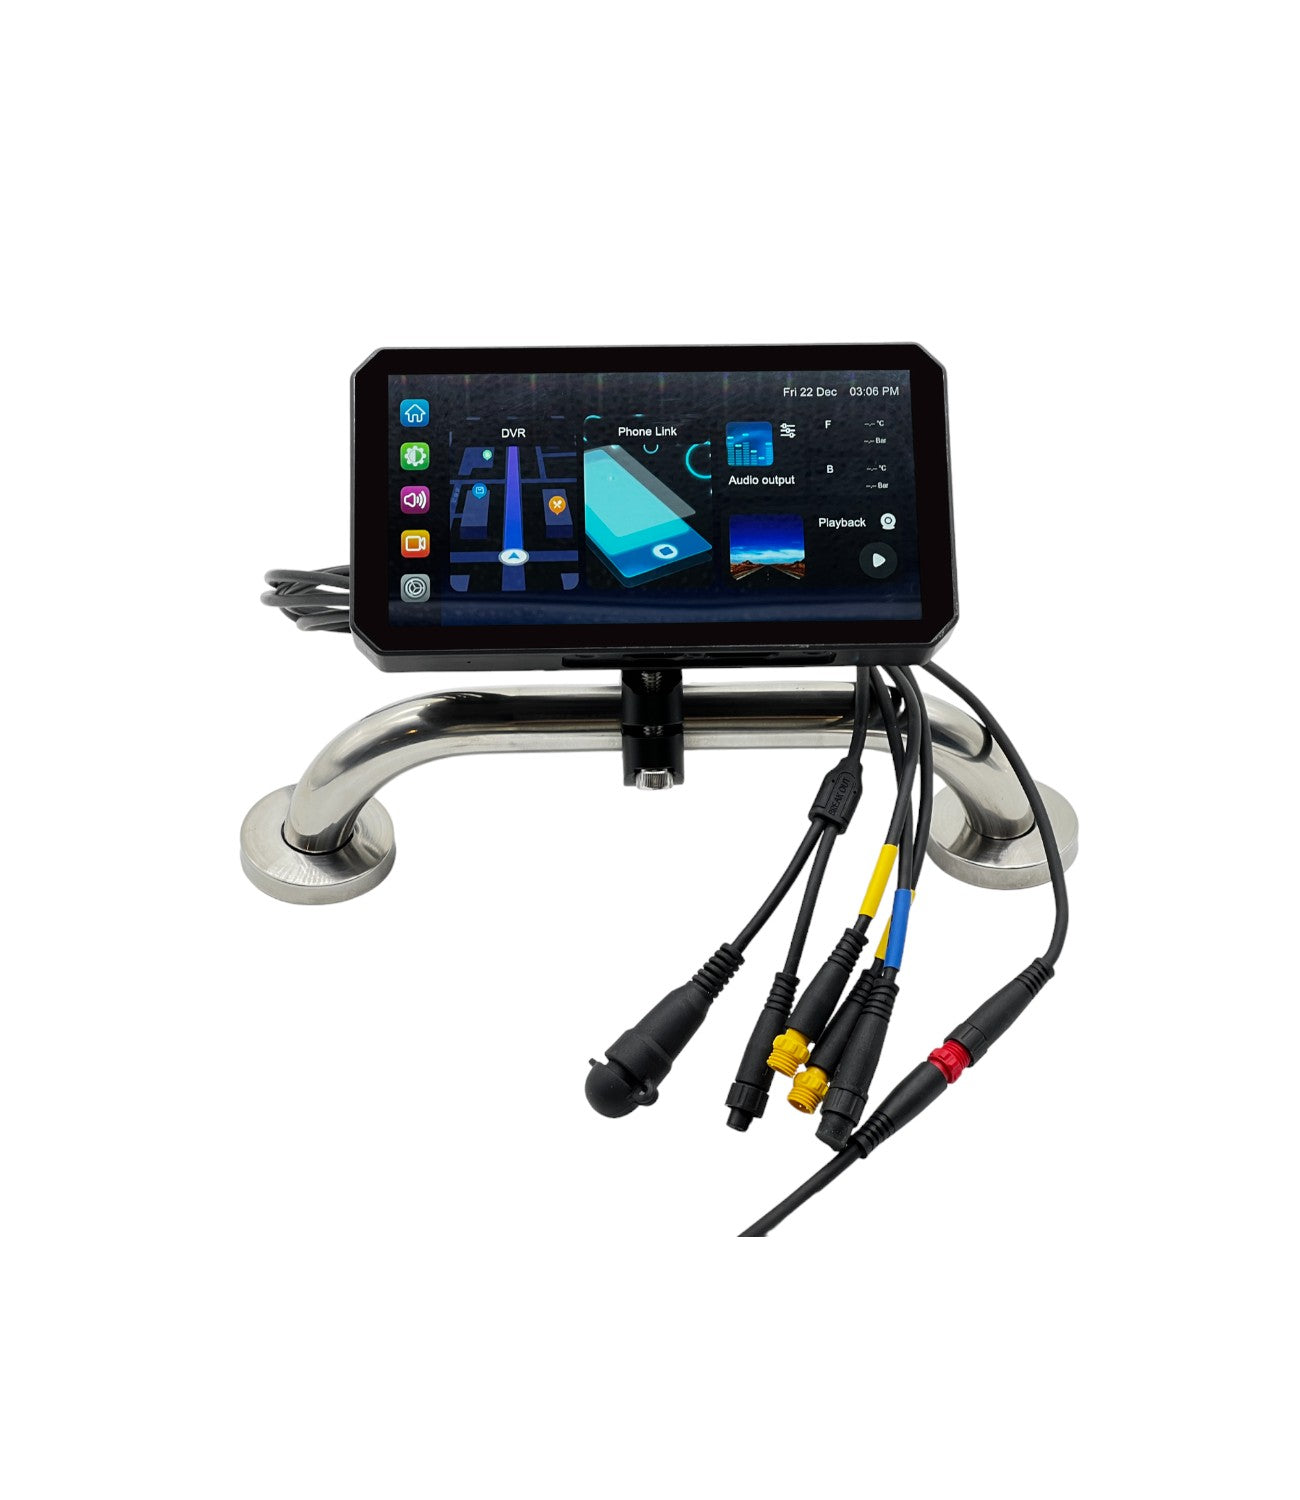 Alien Rider M2 Pro Motorcycle Dual Recording Bike Navigation System TPMS GPS With Touch Screen and Radar